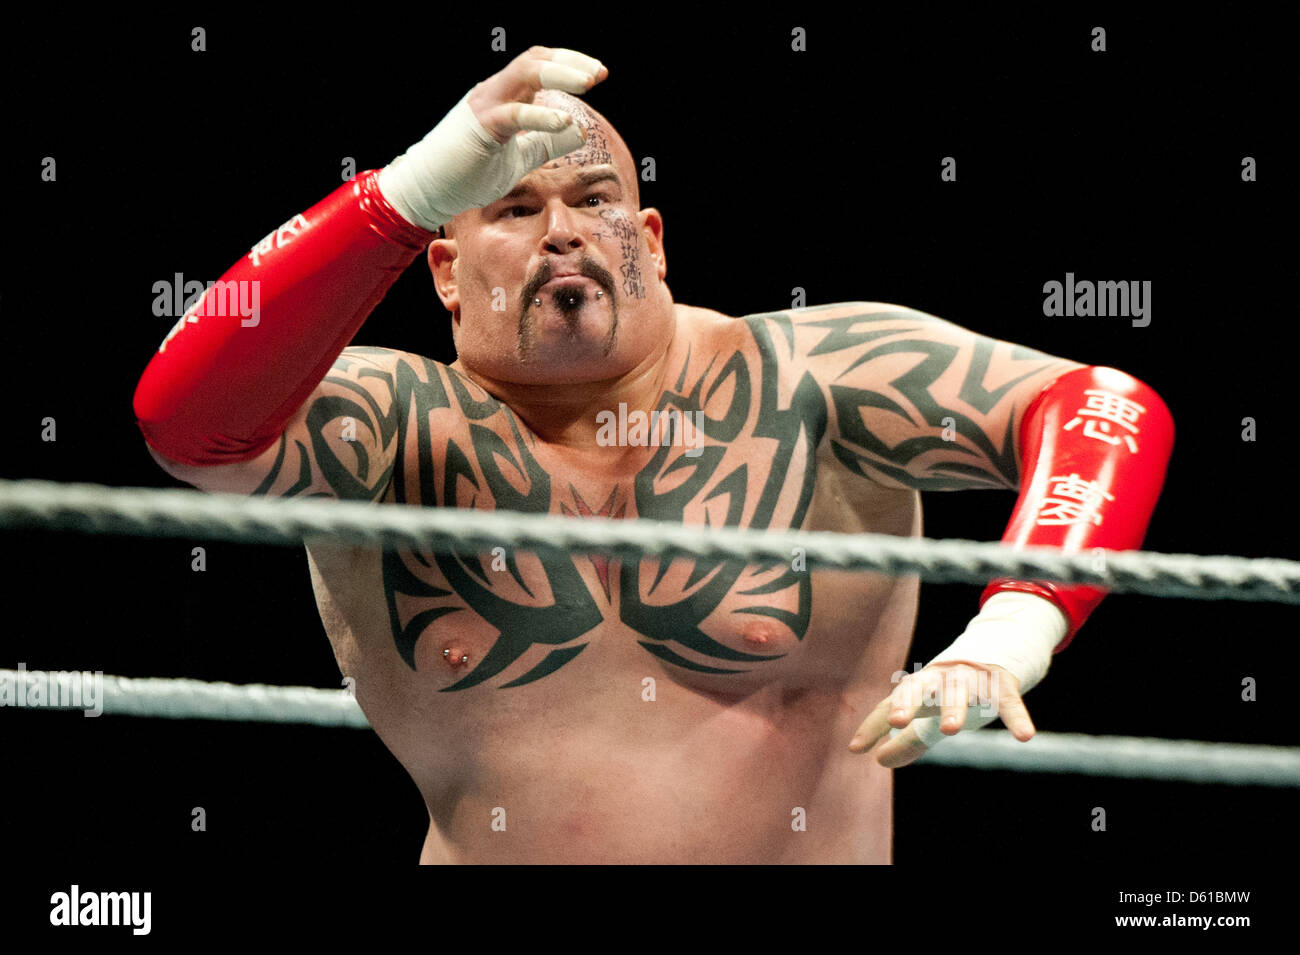 US-wrestler Lord Tensai gestures during a fight at the RAW WrestleMania Revenge Tour at the o2 World canue in Berlin, Germany, 14 April 2012. The WWE (World Wrestling Entertainment) celebrates its 20th German anniversary this April. The first show in Germany was staged in Kiel, Germany, in April 1992. Photo: Sebastian Kahnert Stock Photo